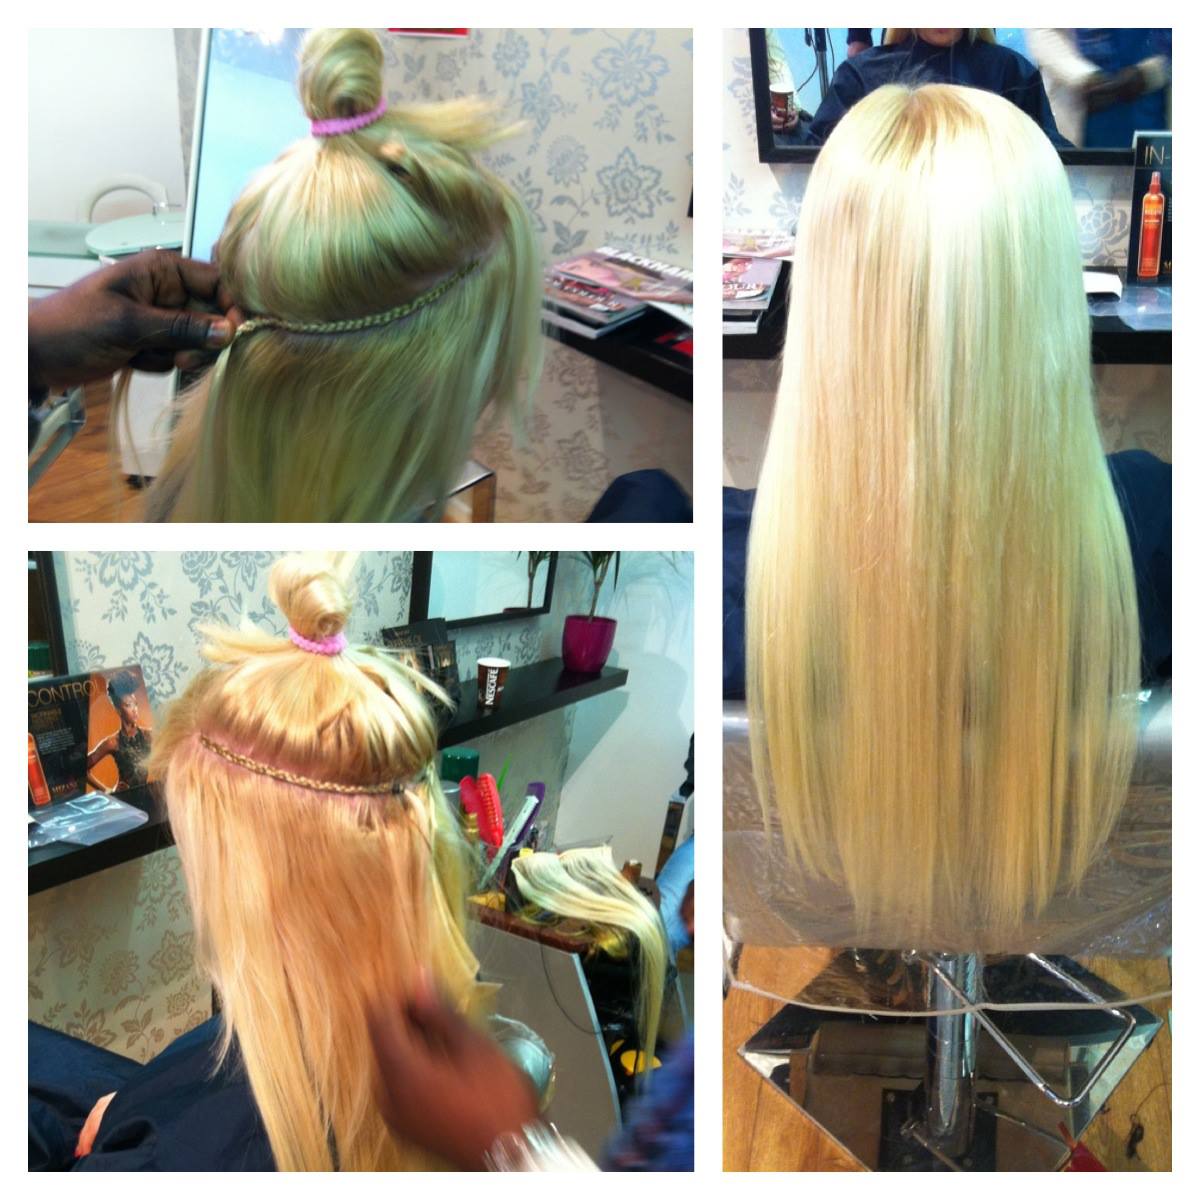 Hair Extensions Suppplied & Fitted